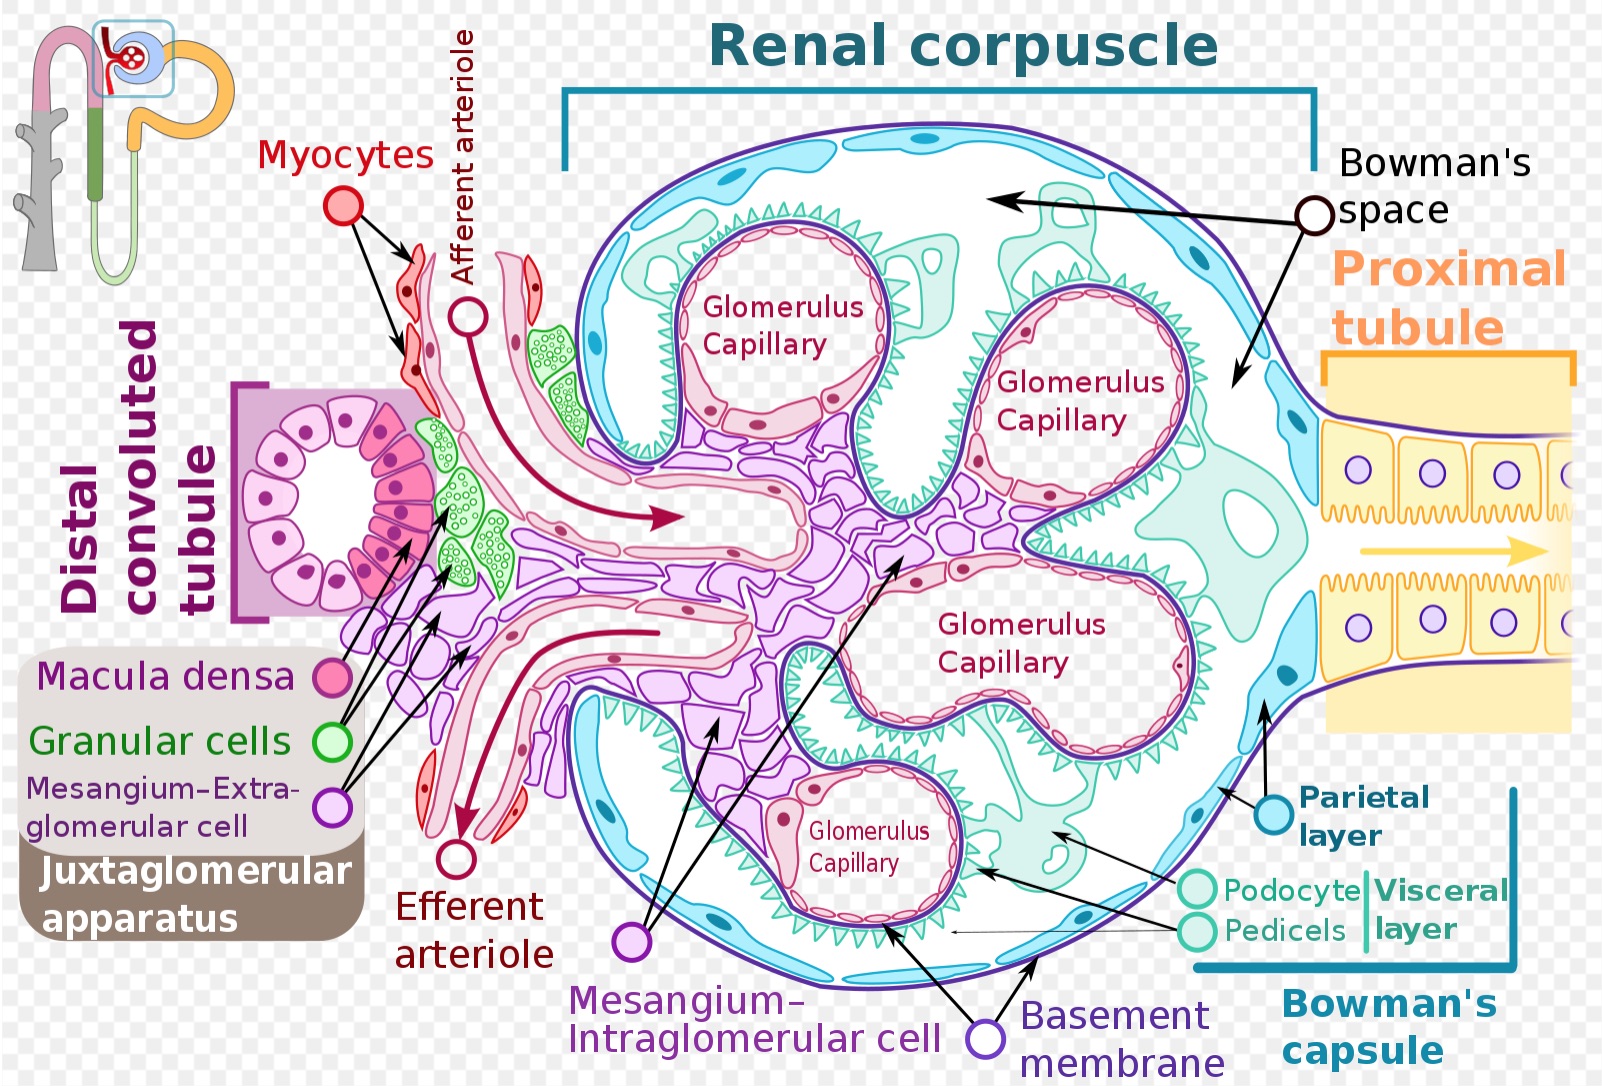 Image of a glomerulus including Bowman's capsule.